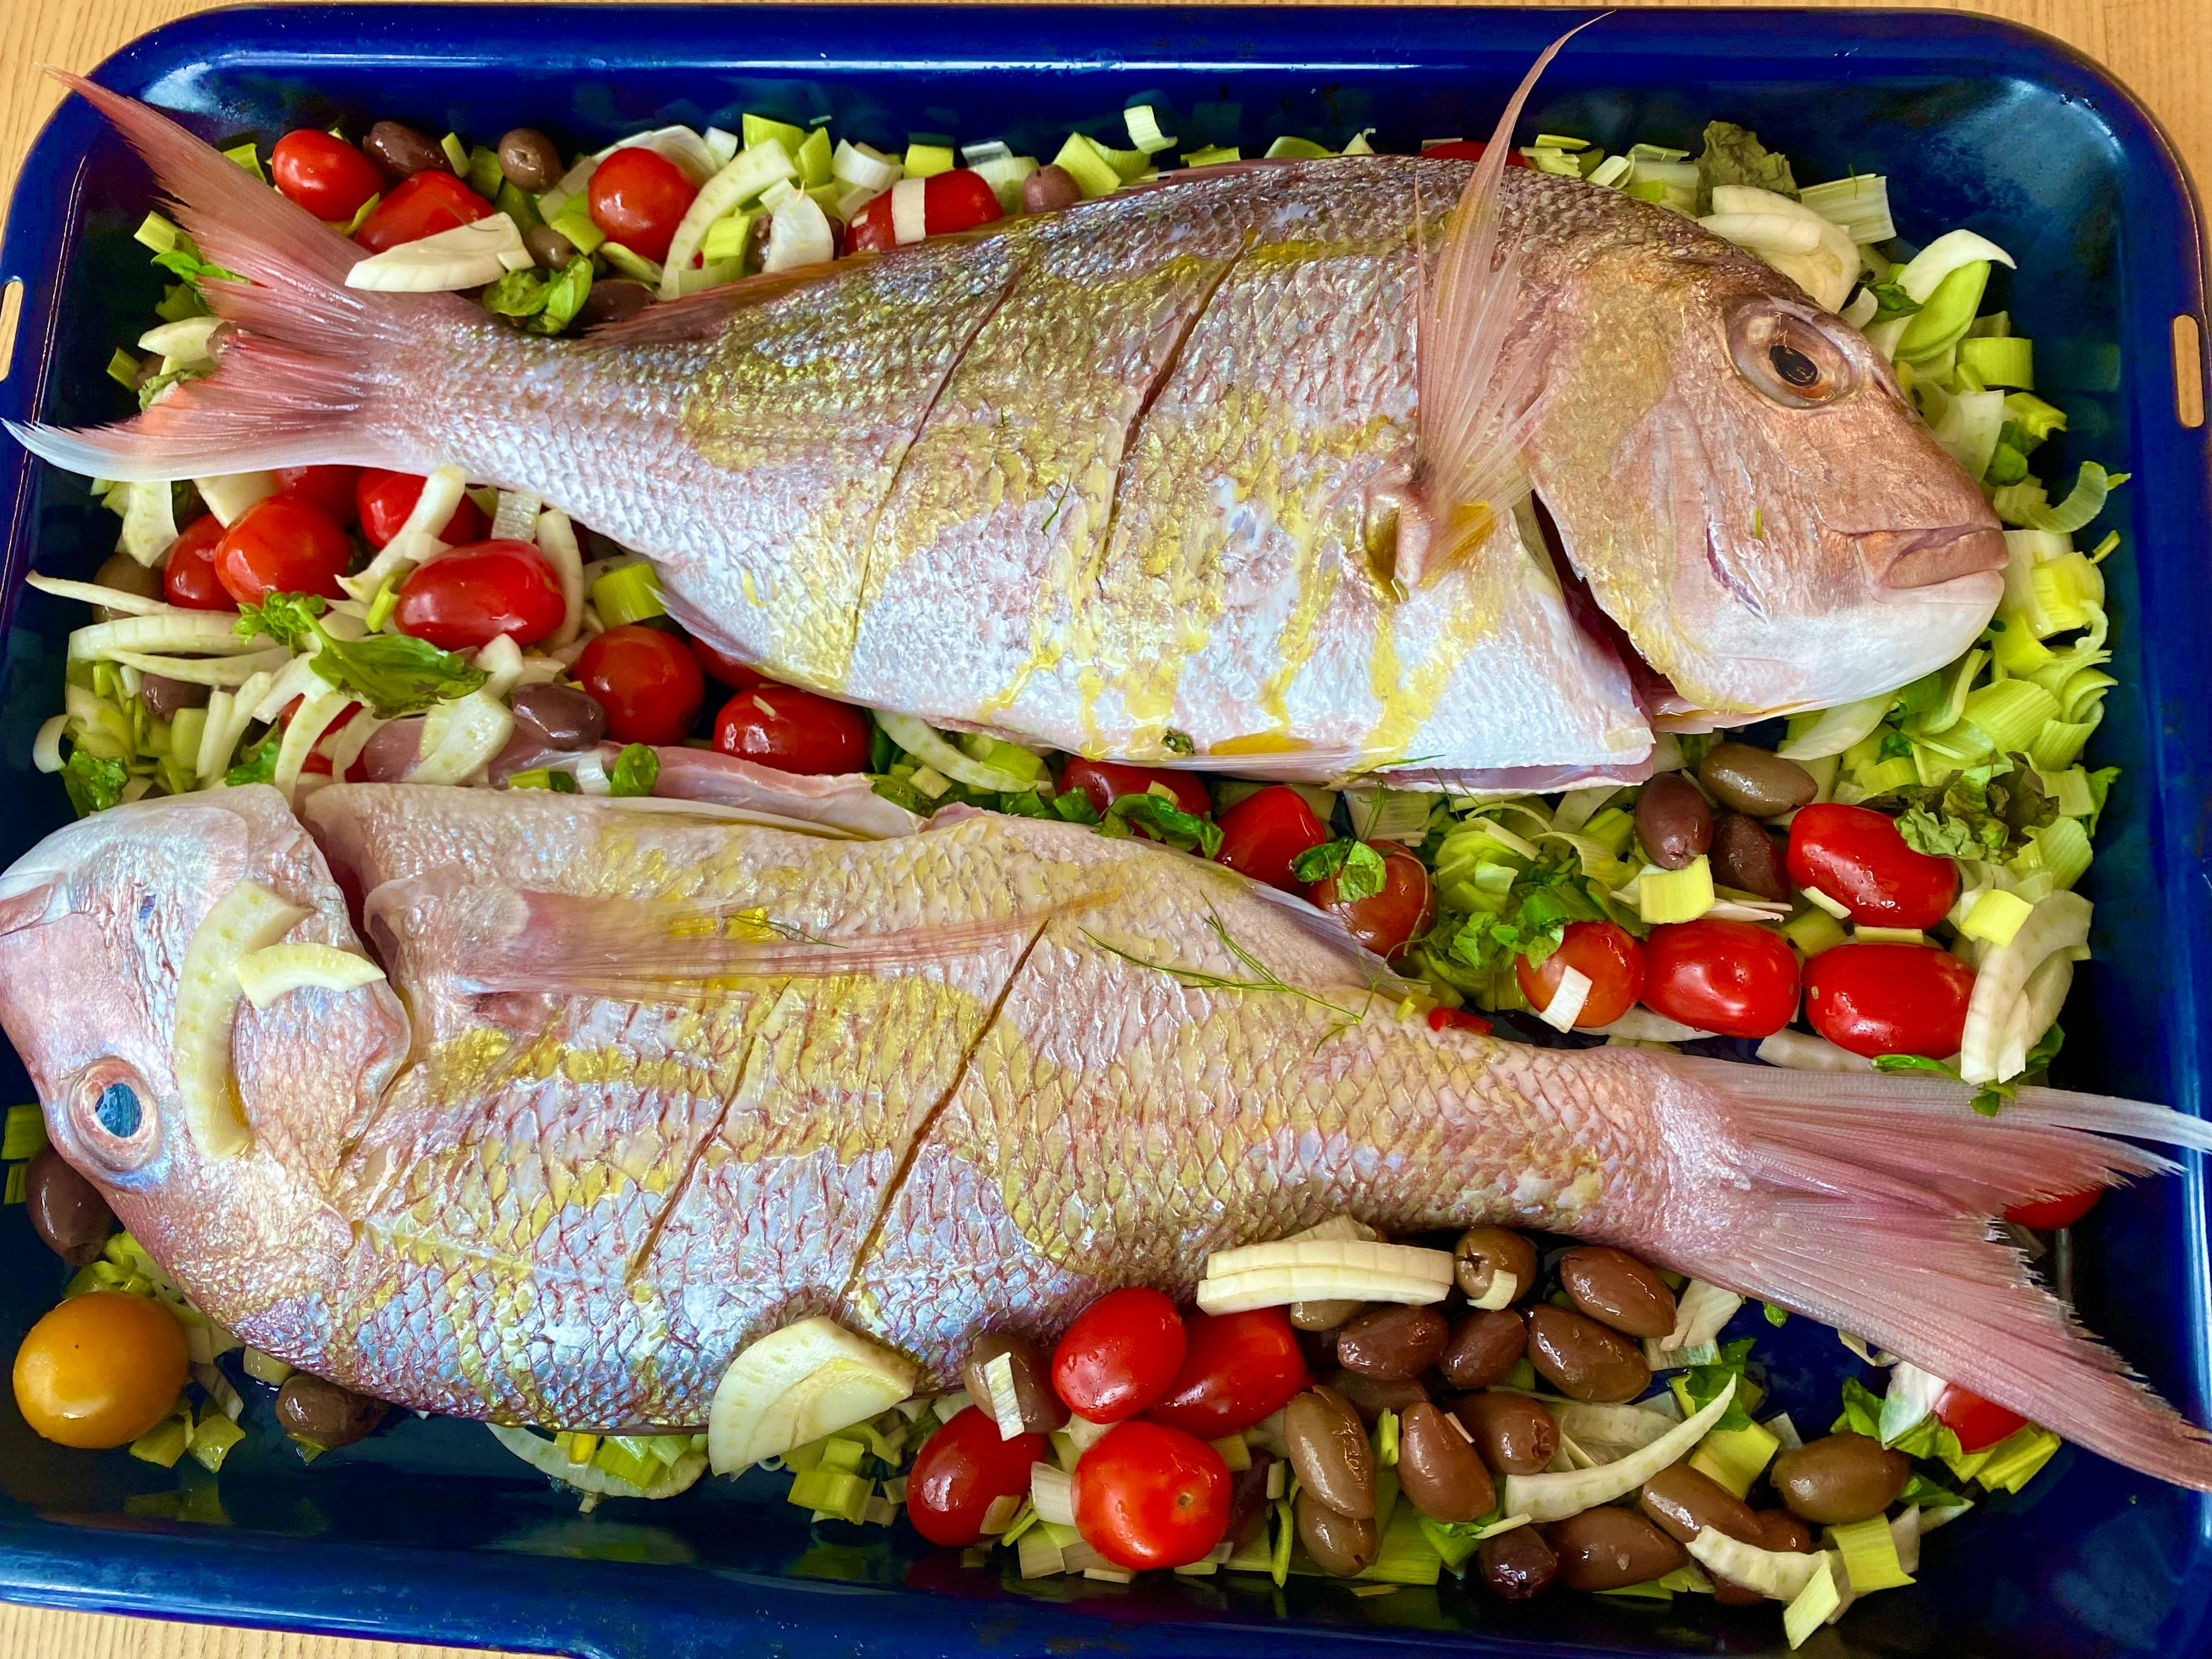 2 snappers on a bed of little tomatoes, olives and fennel